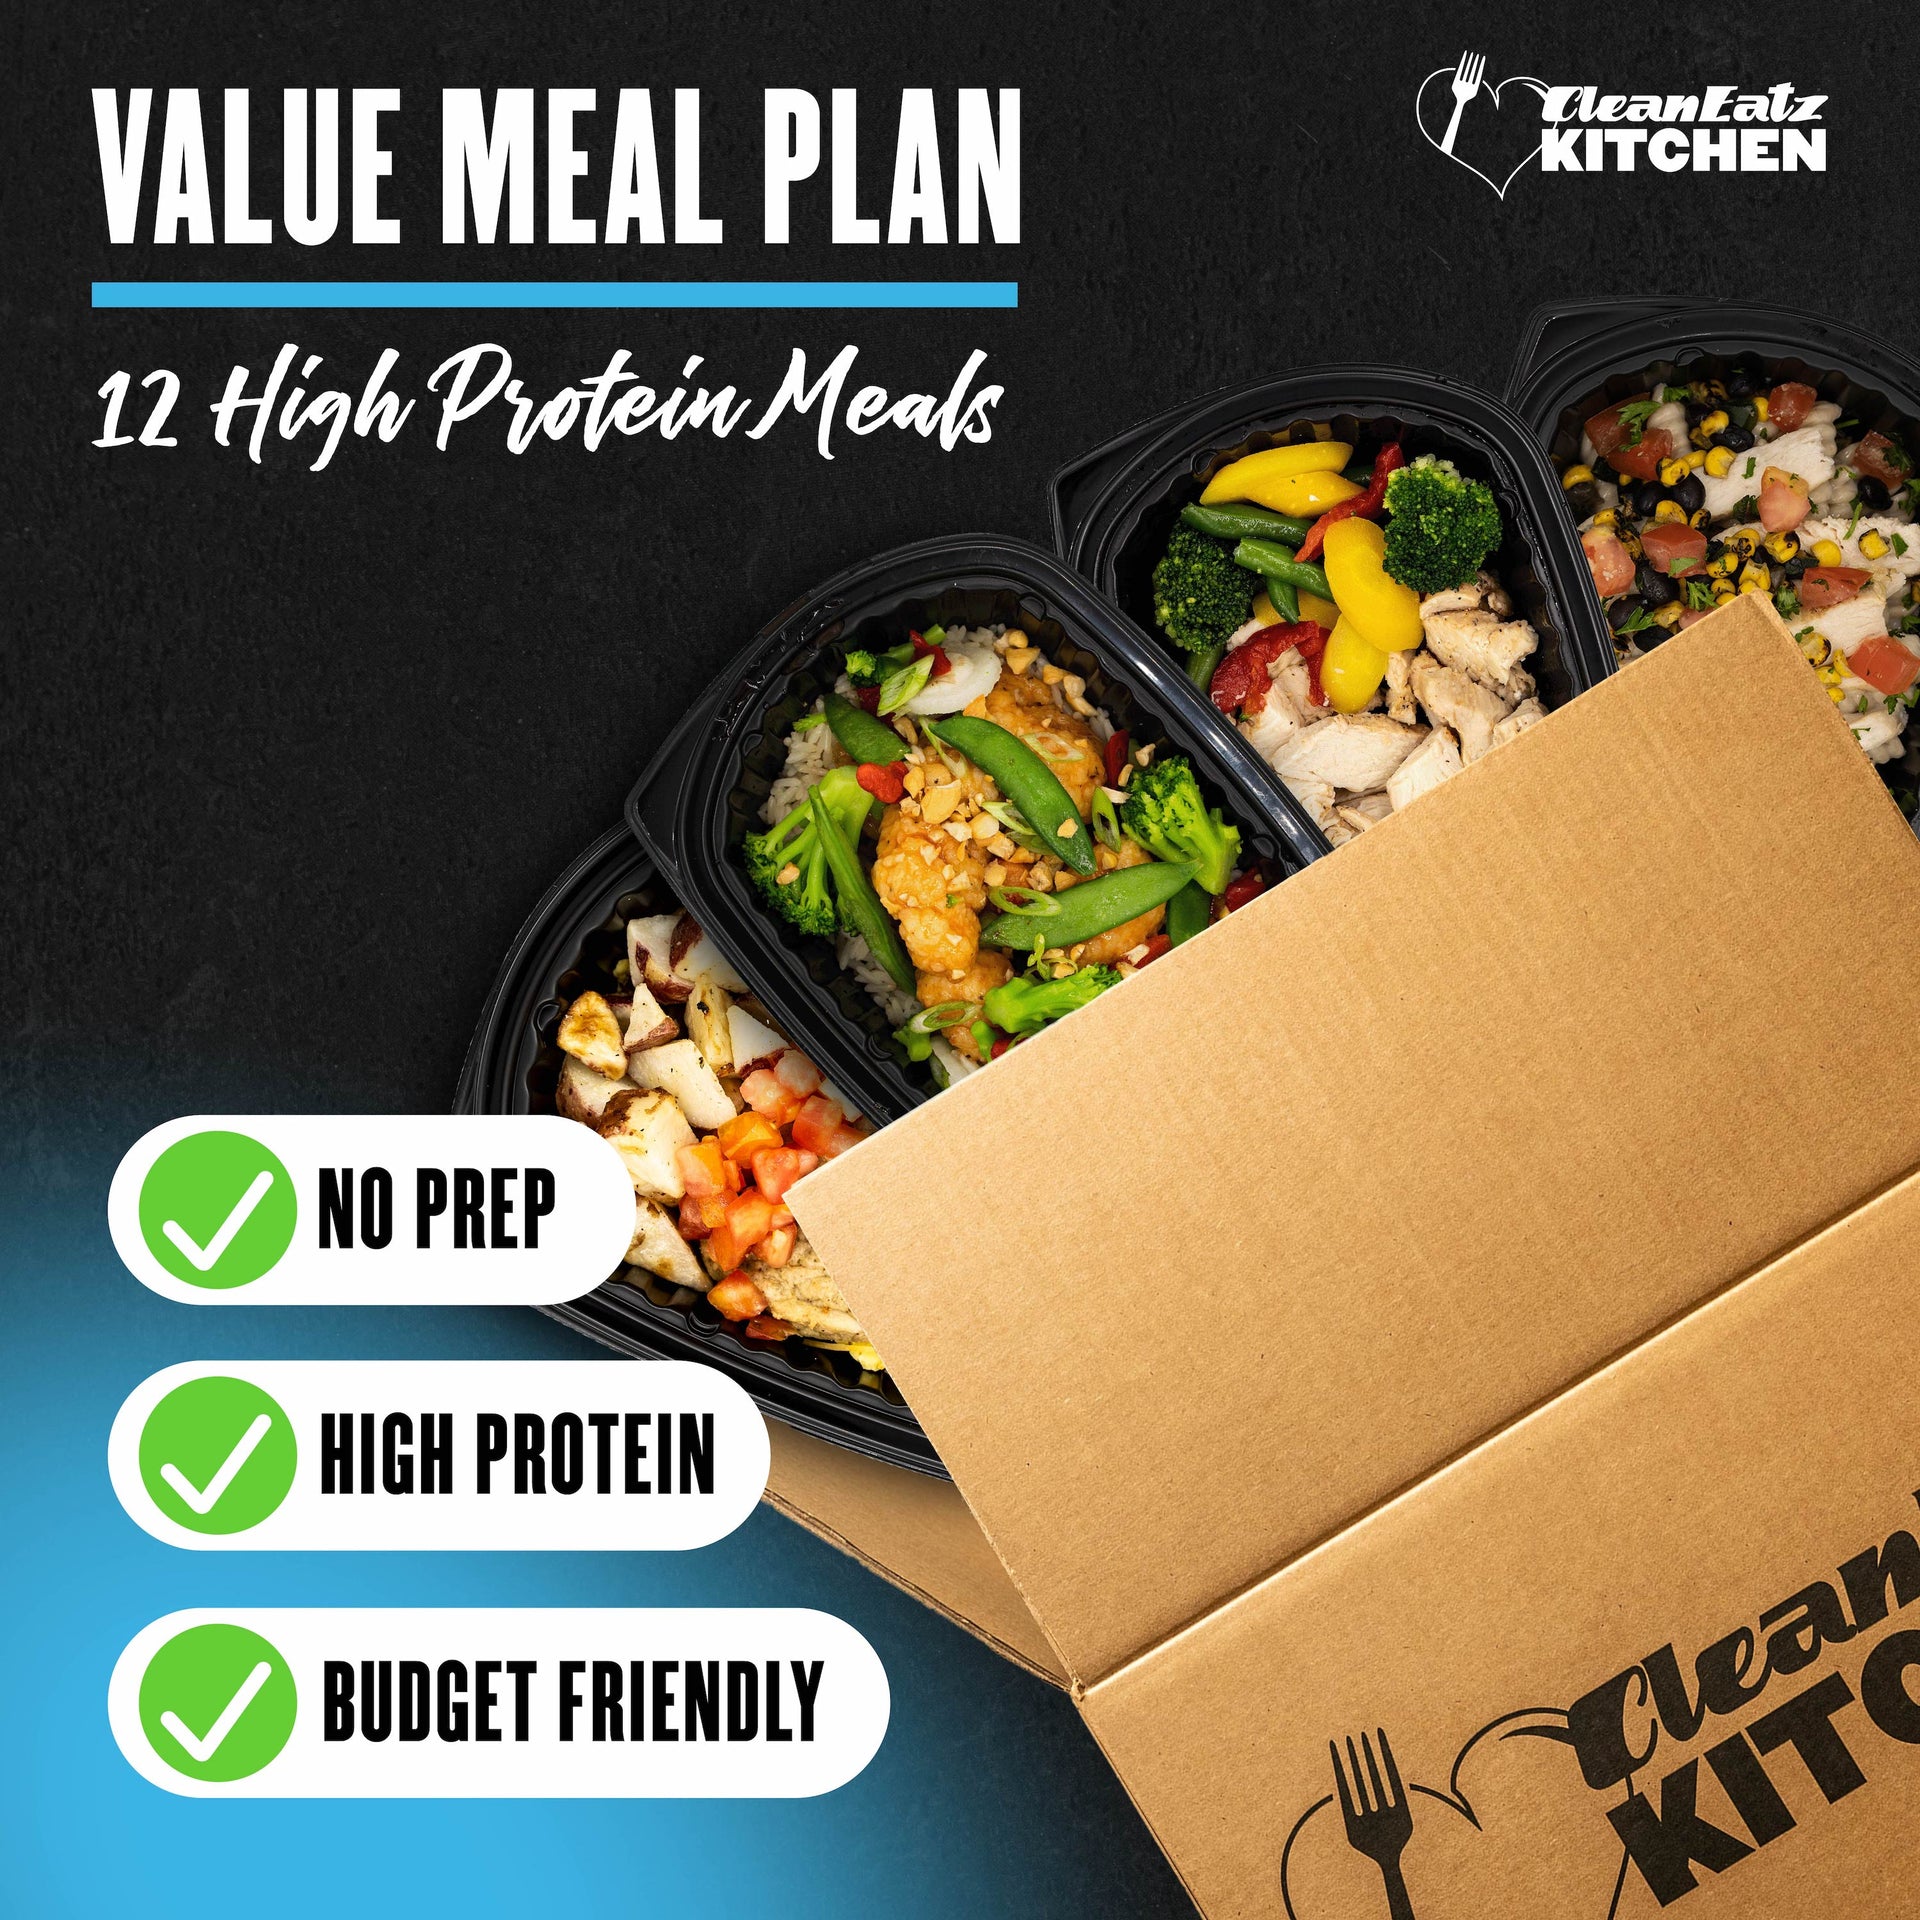 Value meal plans